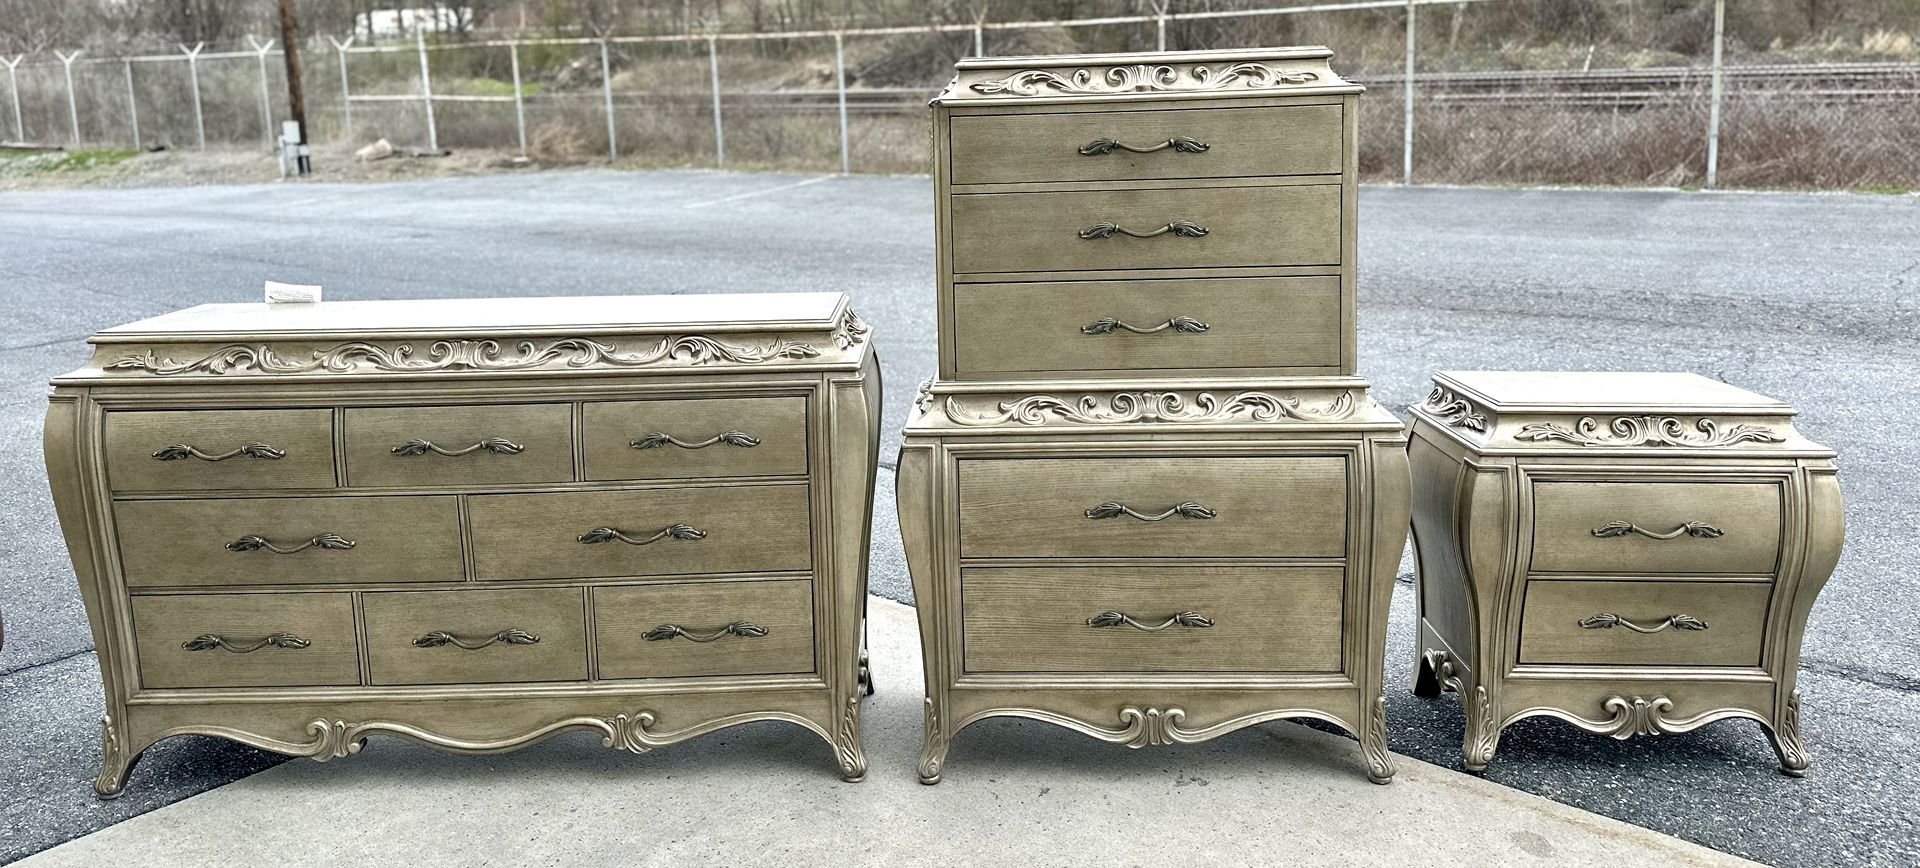 Rhianna Collection Bedroom Set by Pulaski Furniture Includes   - Dresser  -  Chest of Drawers  - Night Stand 